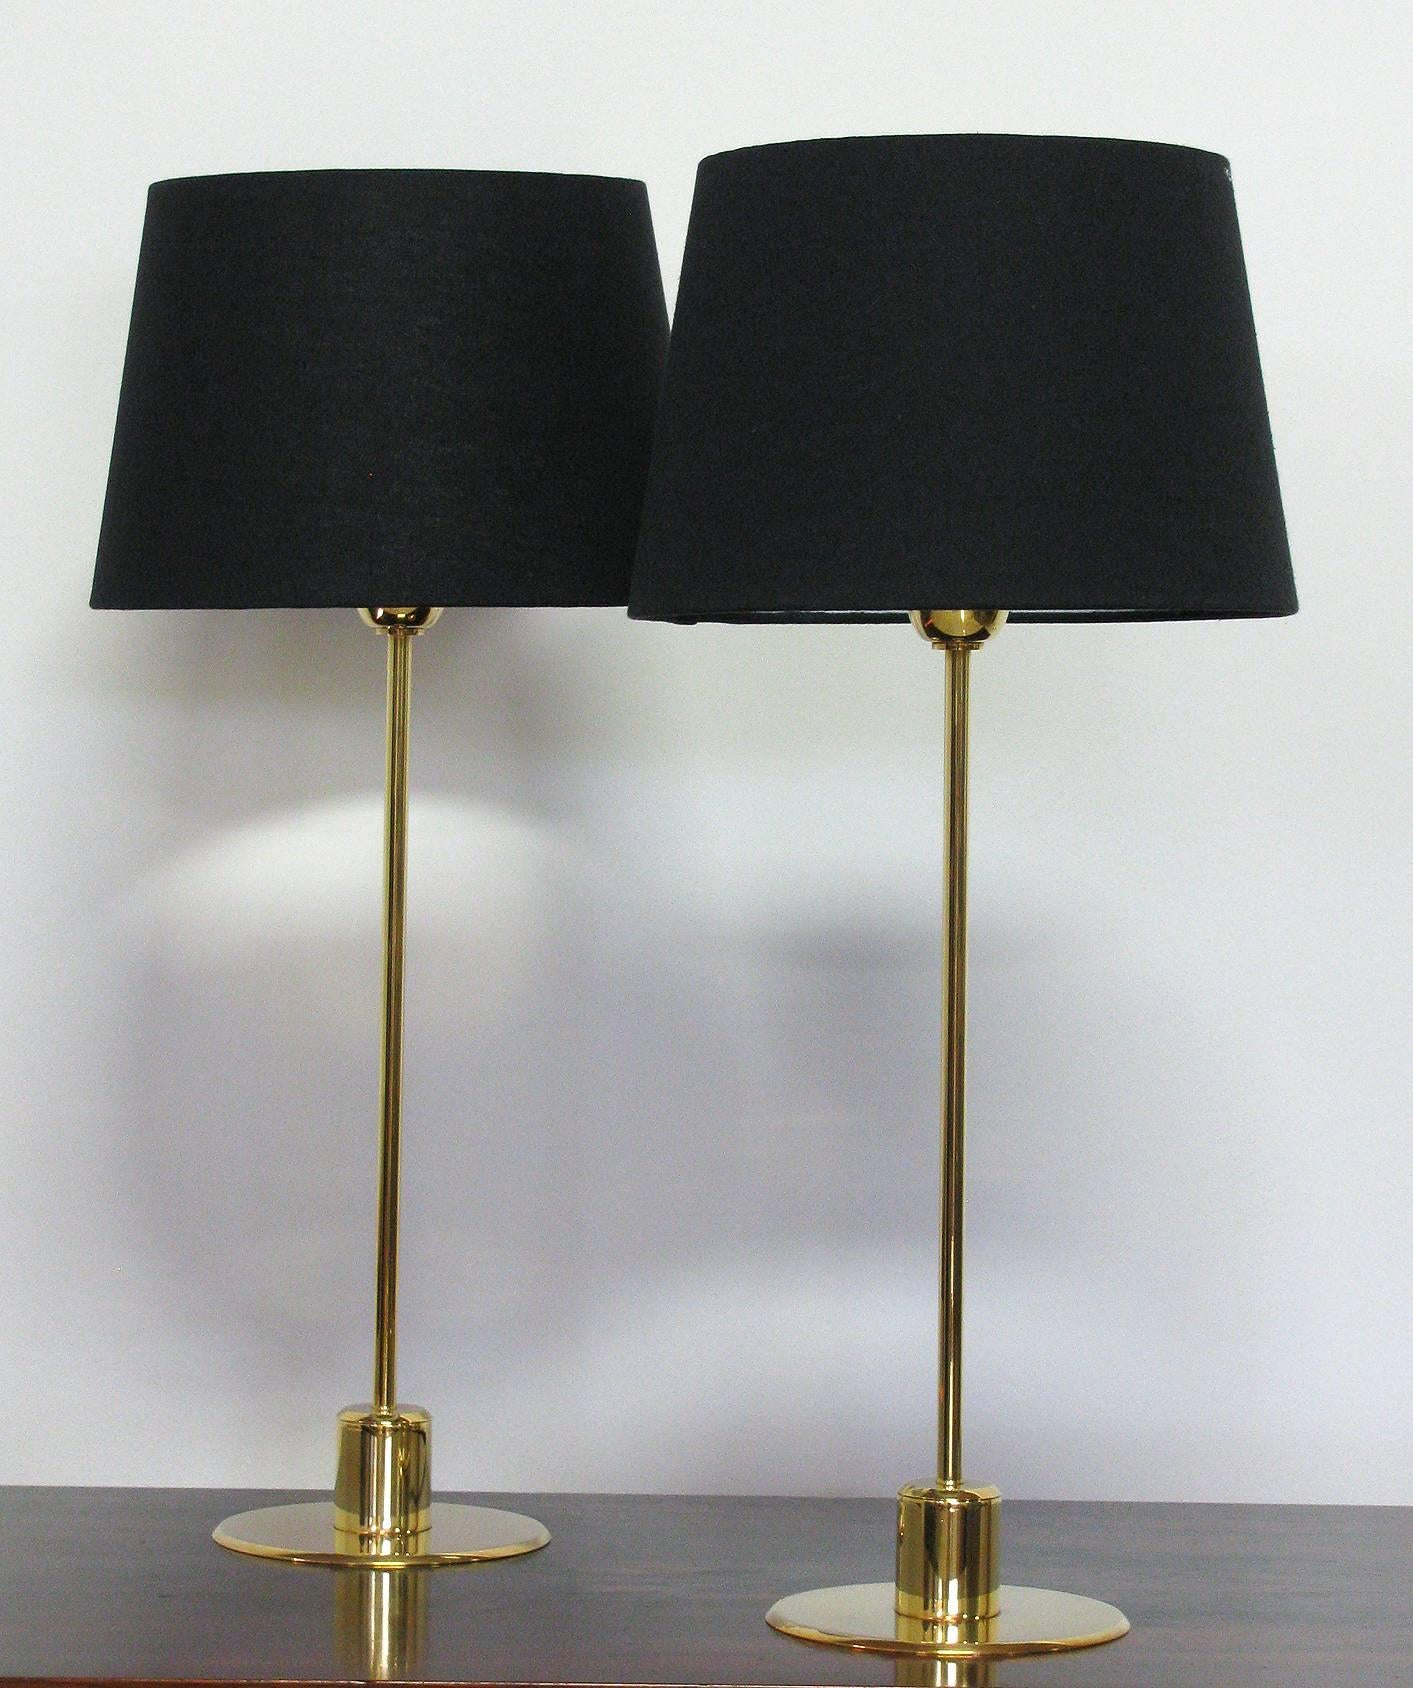 Modernist style polished bronze table lamps designed by The Mirak Collection. Each comprised of a thin bronze stem and round disk base. Imported from Paris, France. Dimensions as shown: 21.5 H (with shade) 17 H (to top of socket) 5.5 inch diameter